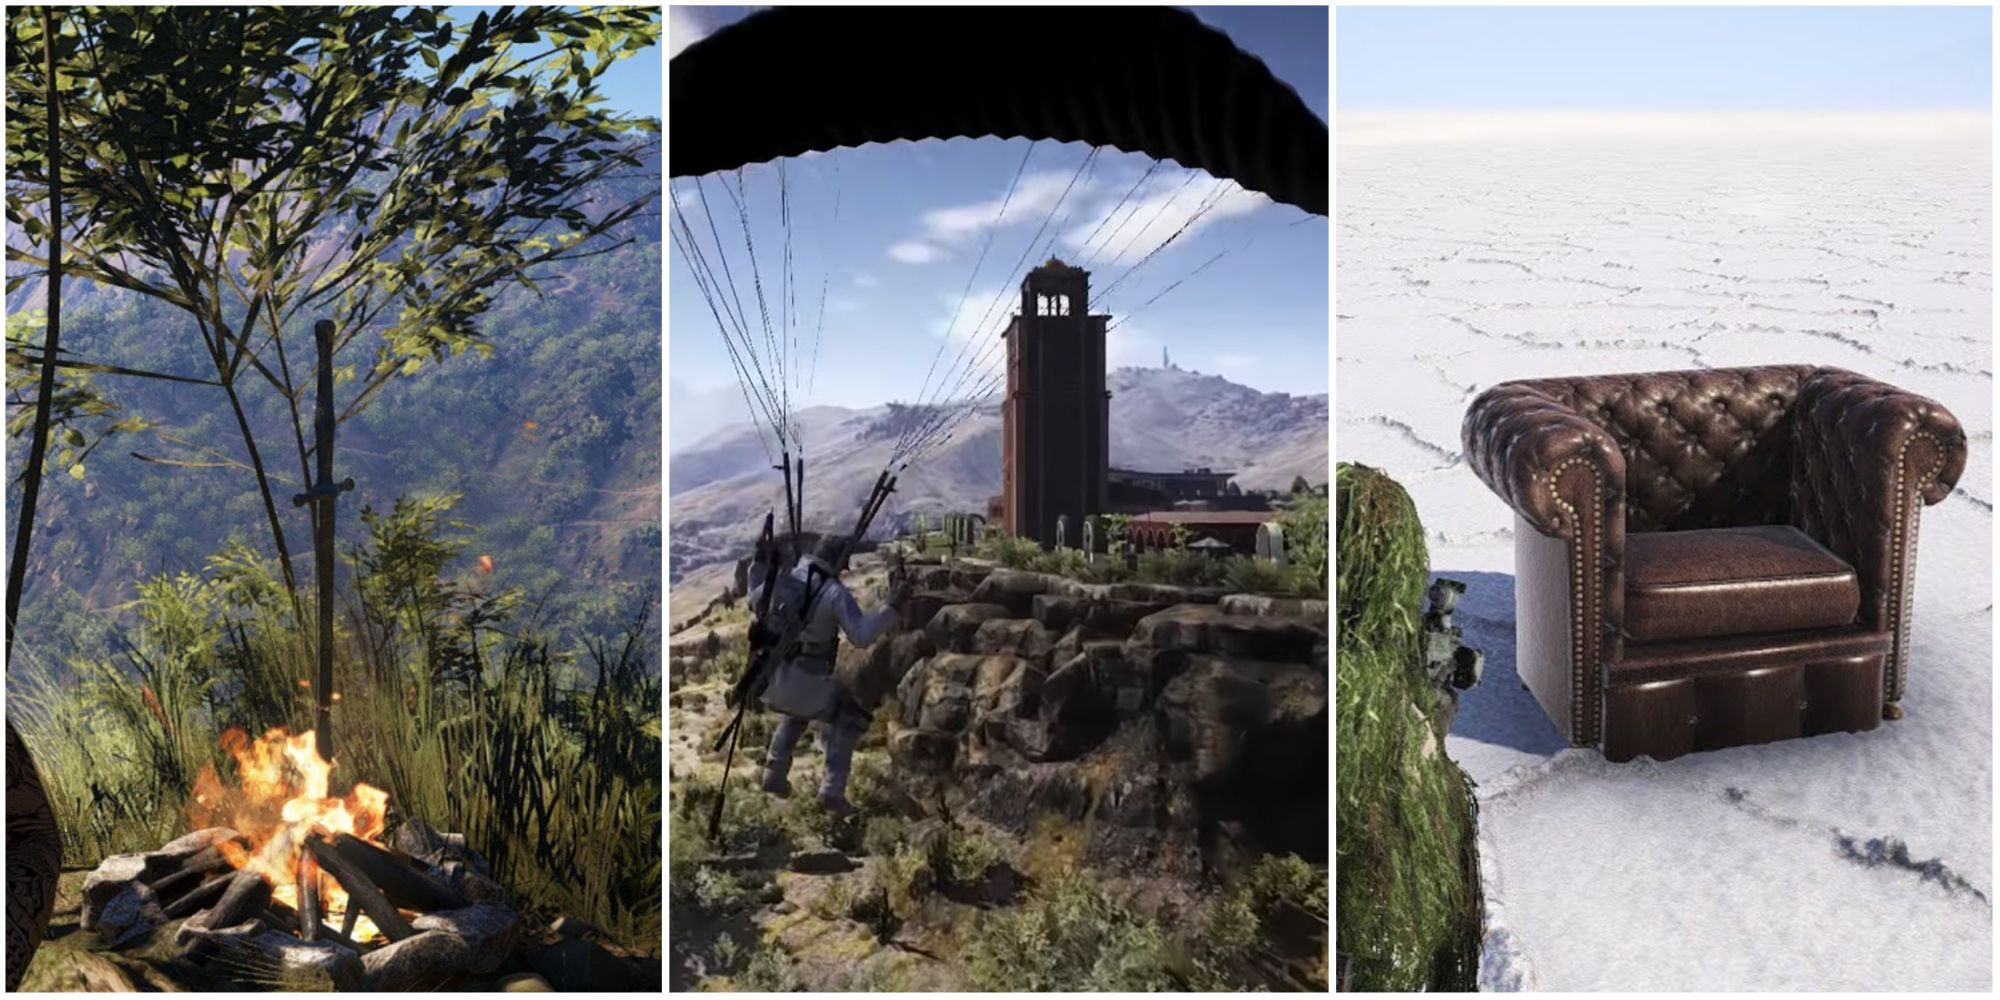 Ghost Recon Wildlands Hidden Locations Image Collage including references to Dark Souls, Assassin's Creed and The Matrix